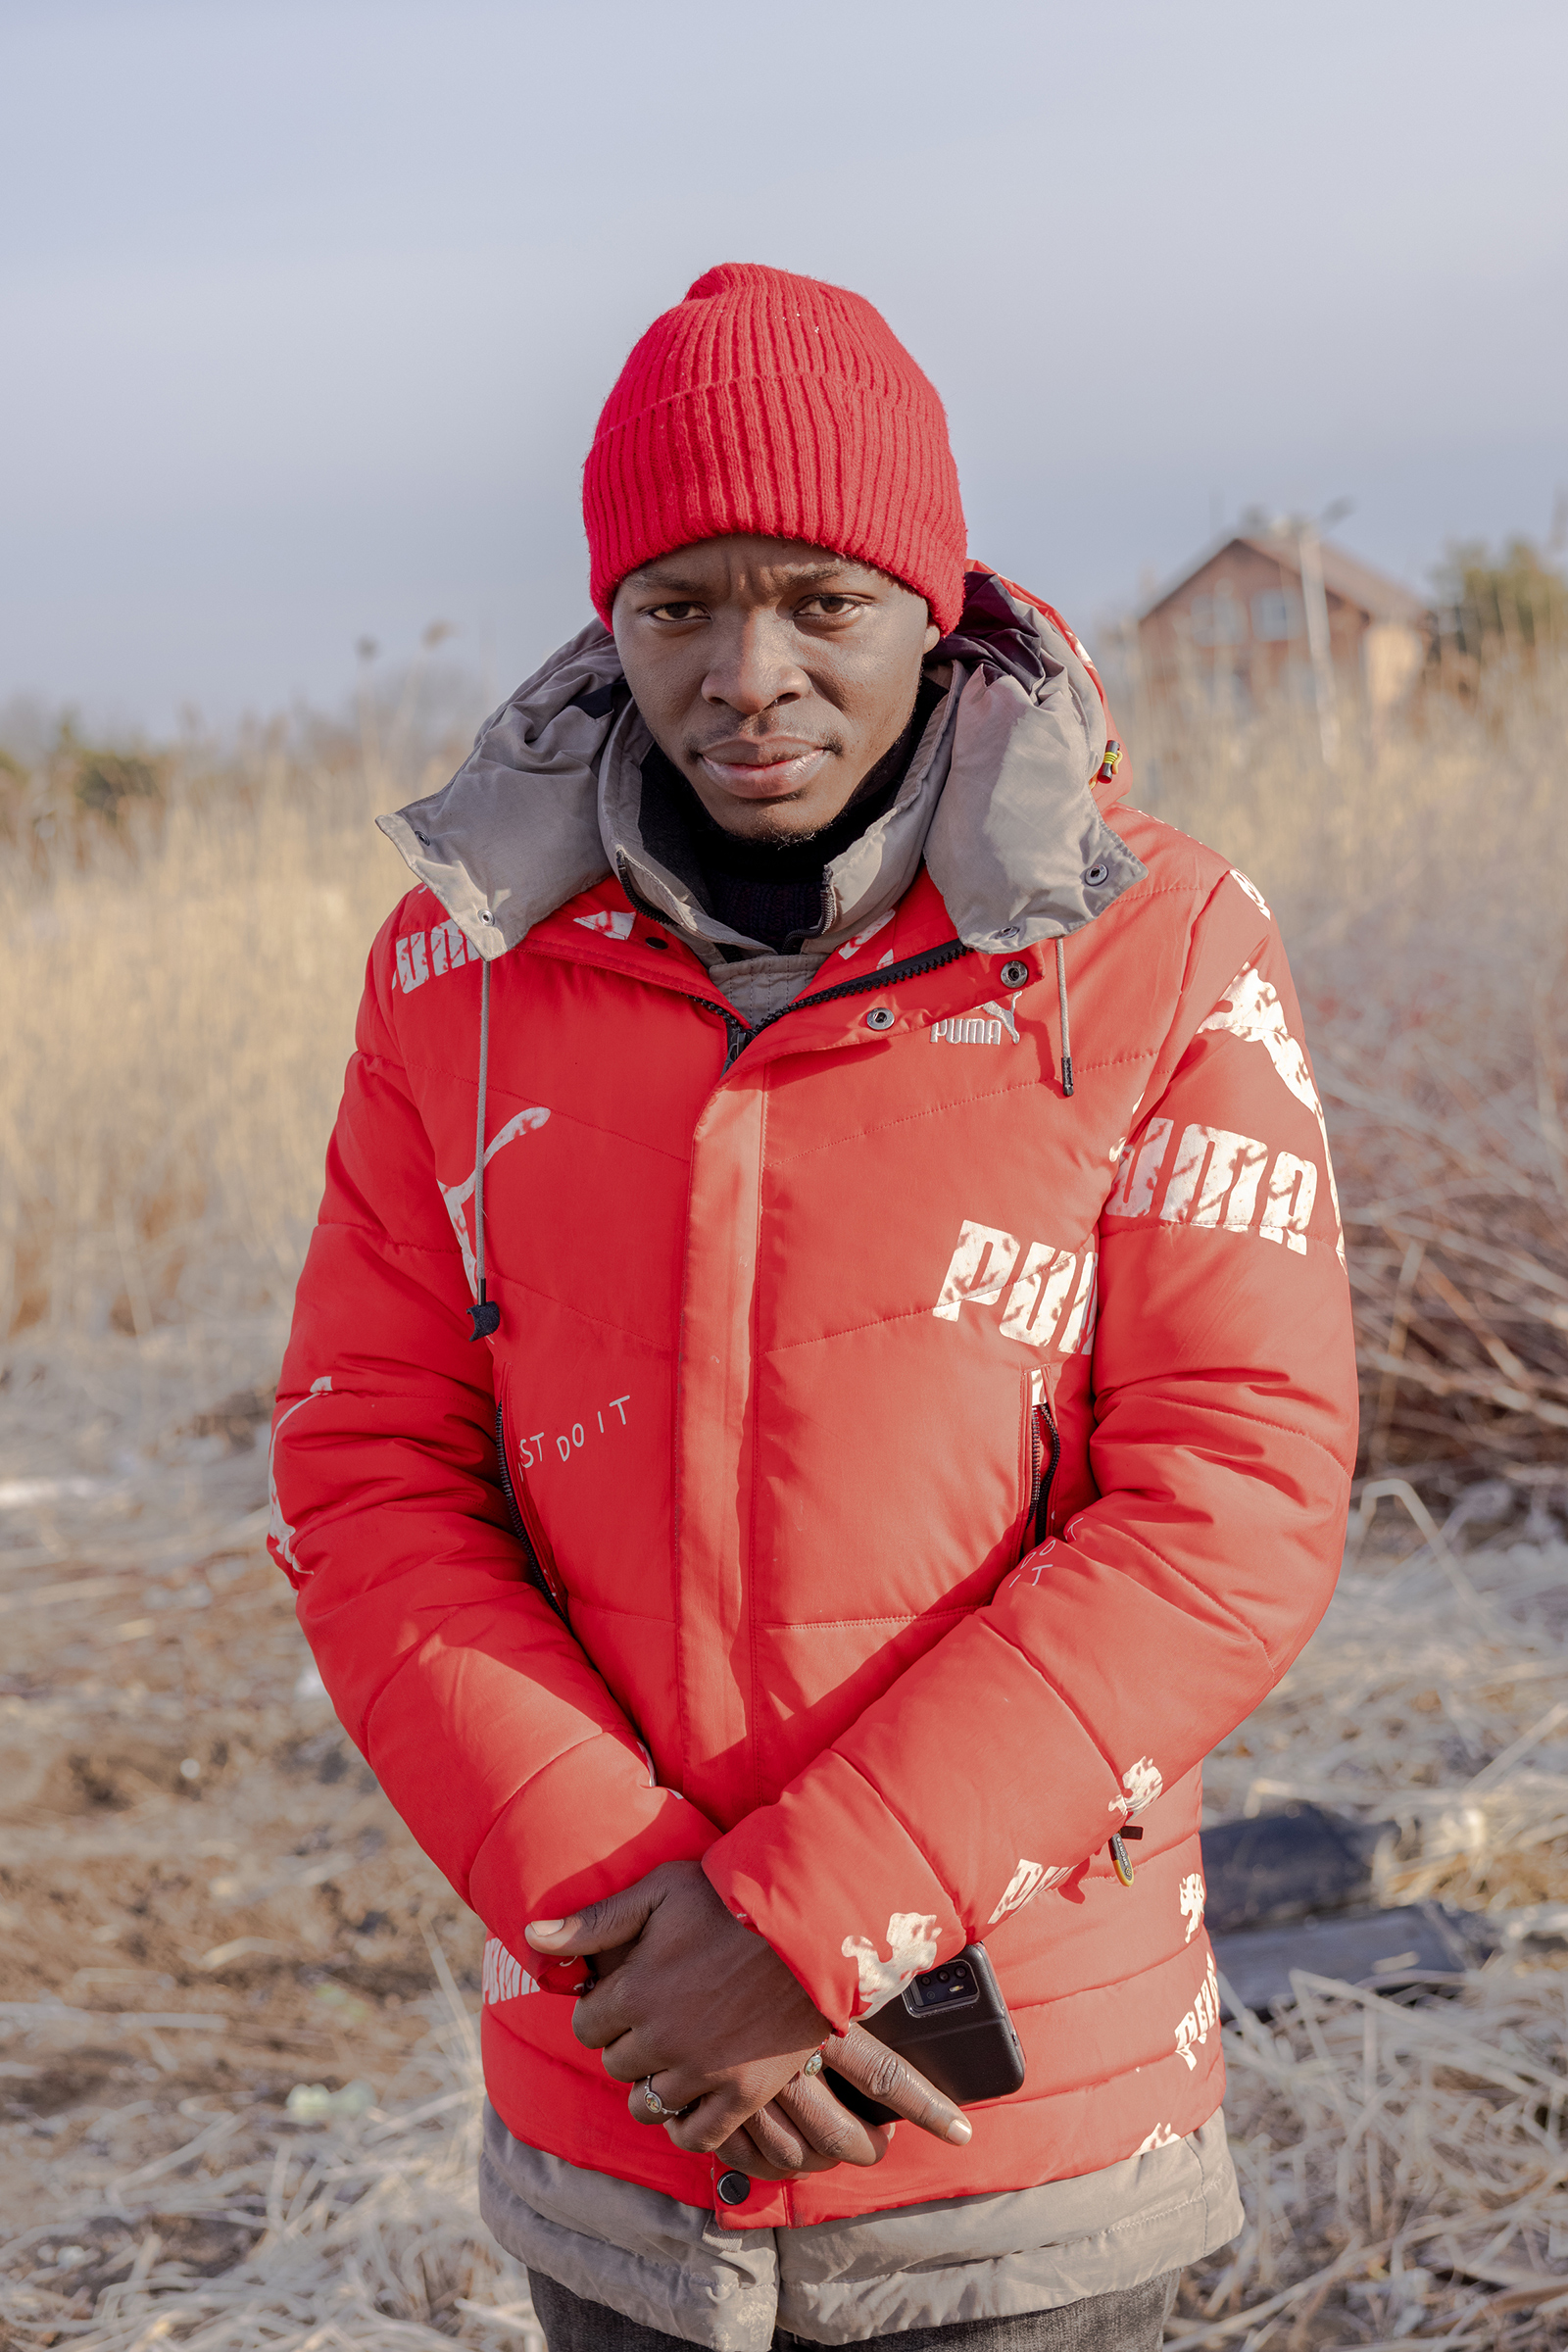 Enock Tshimanga, a student from Congo, at the Medyka crossing on March 1. (Natalie Keyssar for TIME)